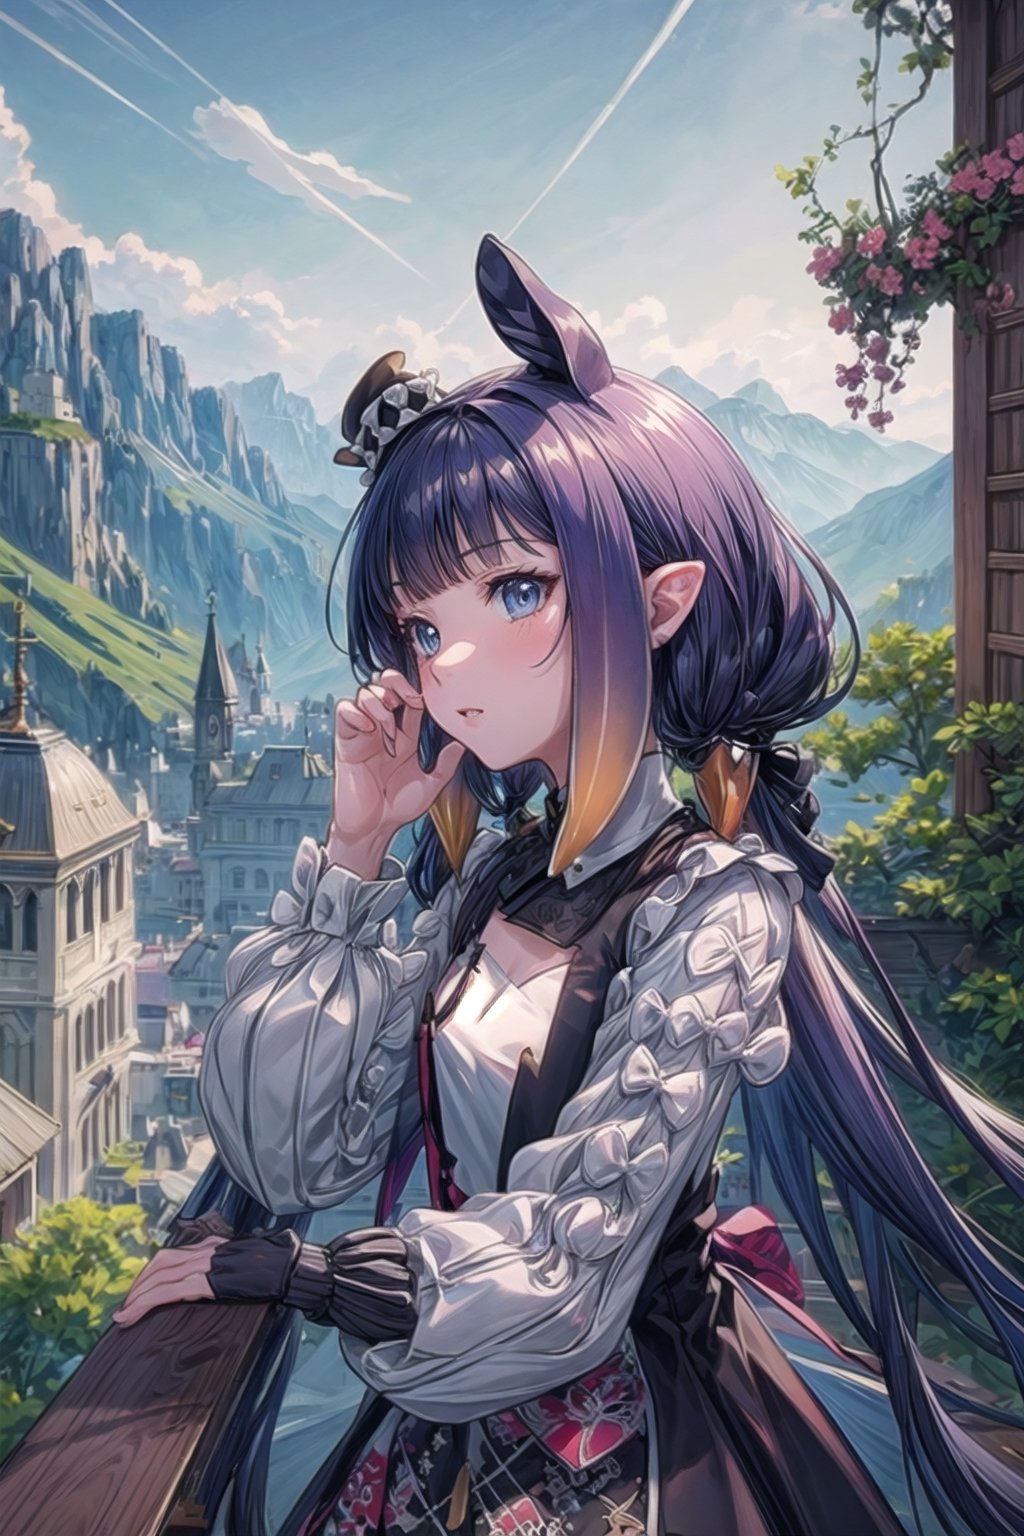 //Quality
(((best quality, 8k wallpaper))), ((detailed eyes, detailed illustration, masterpiece, ultra-detailed)),

//Charater
1girl, solo, ninomae ina'nis, bangs, inacolorful, multicolored clothes, mini hat

// Pose
profile, in_profile, upper body, (dynamic angle), 

// Background
balcony scenery, blue cloudy sky scenery, plants and flowers, mountains scenery